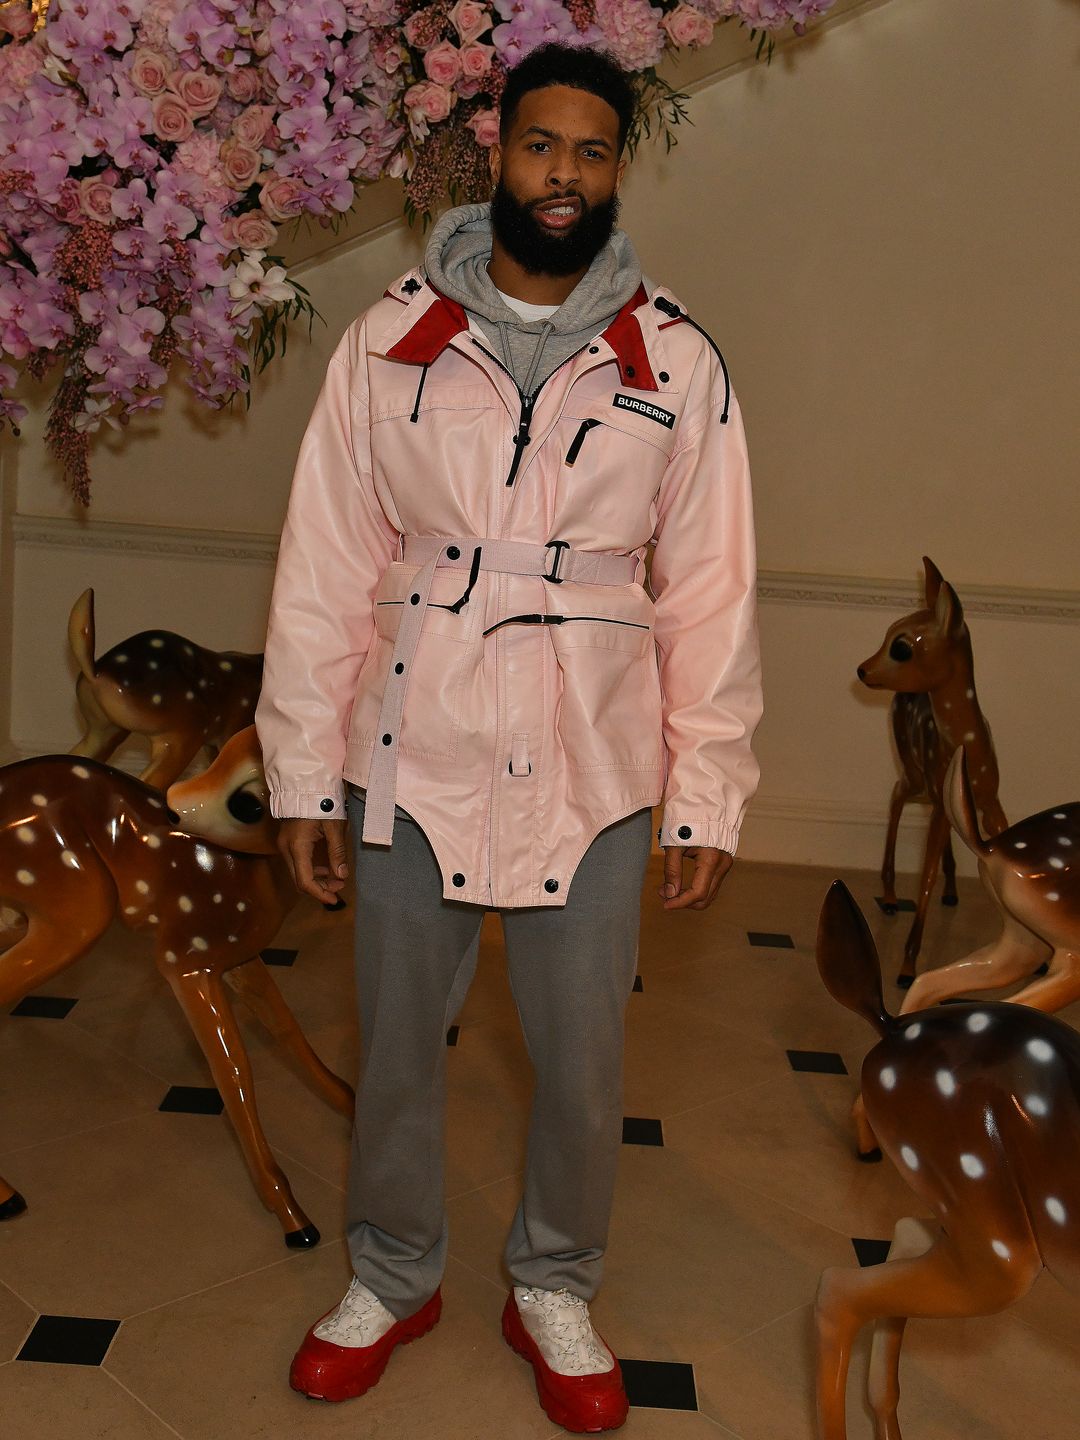 Odell Beckham Jr. attends the Burberry Autumn/Winter 2020 show after party in a pink Burberry raincoat